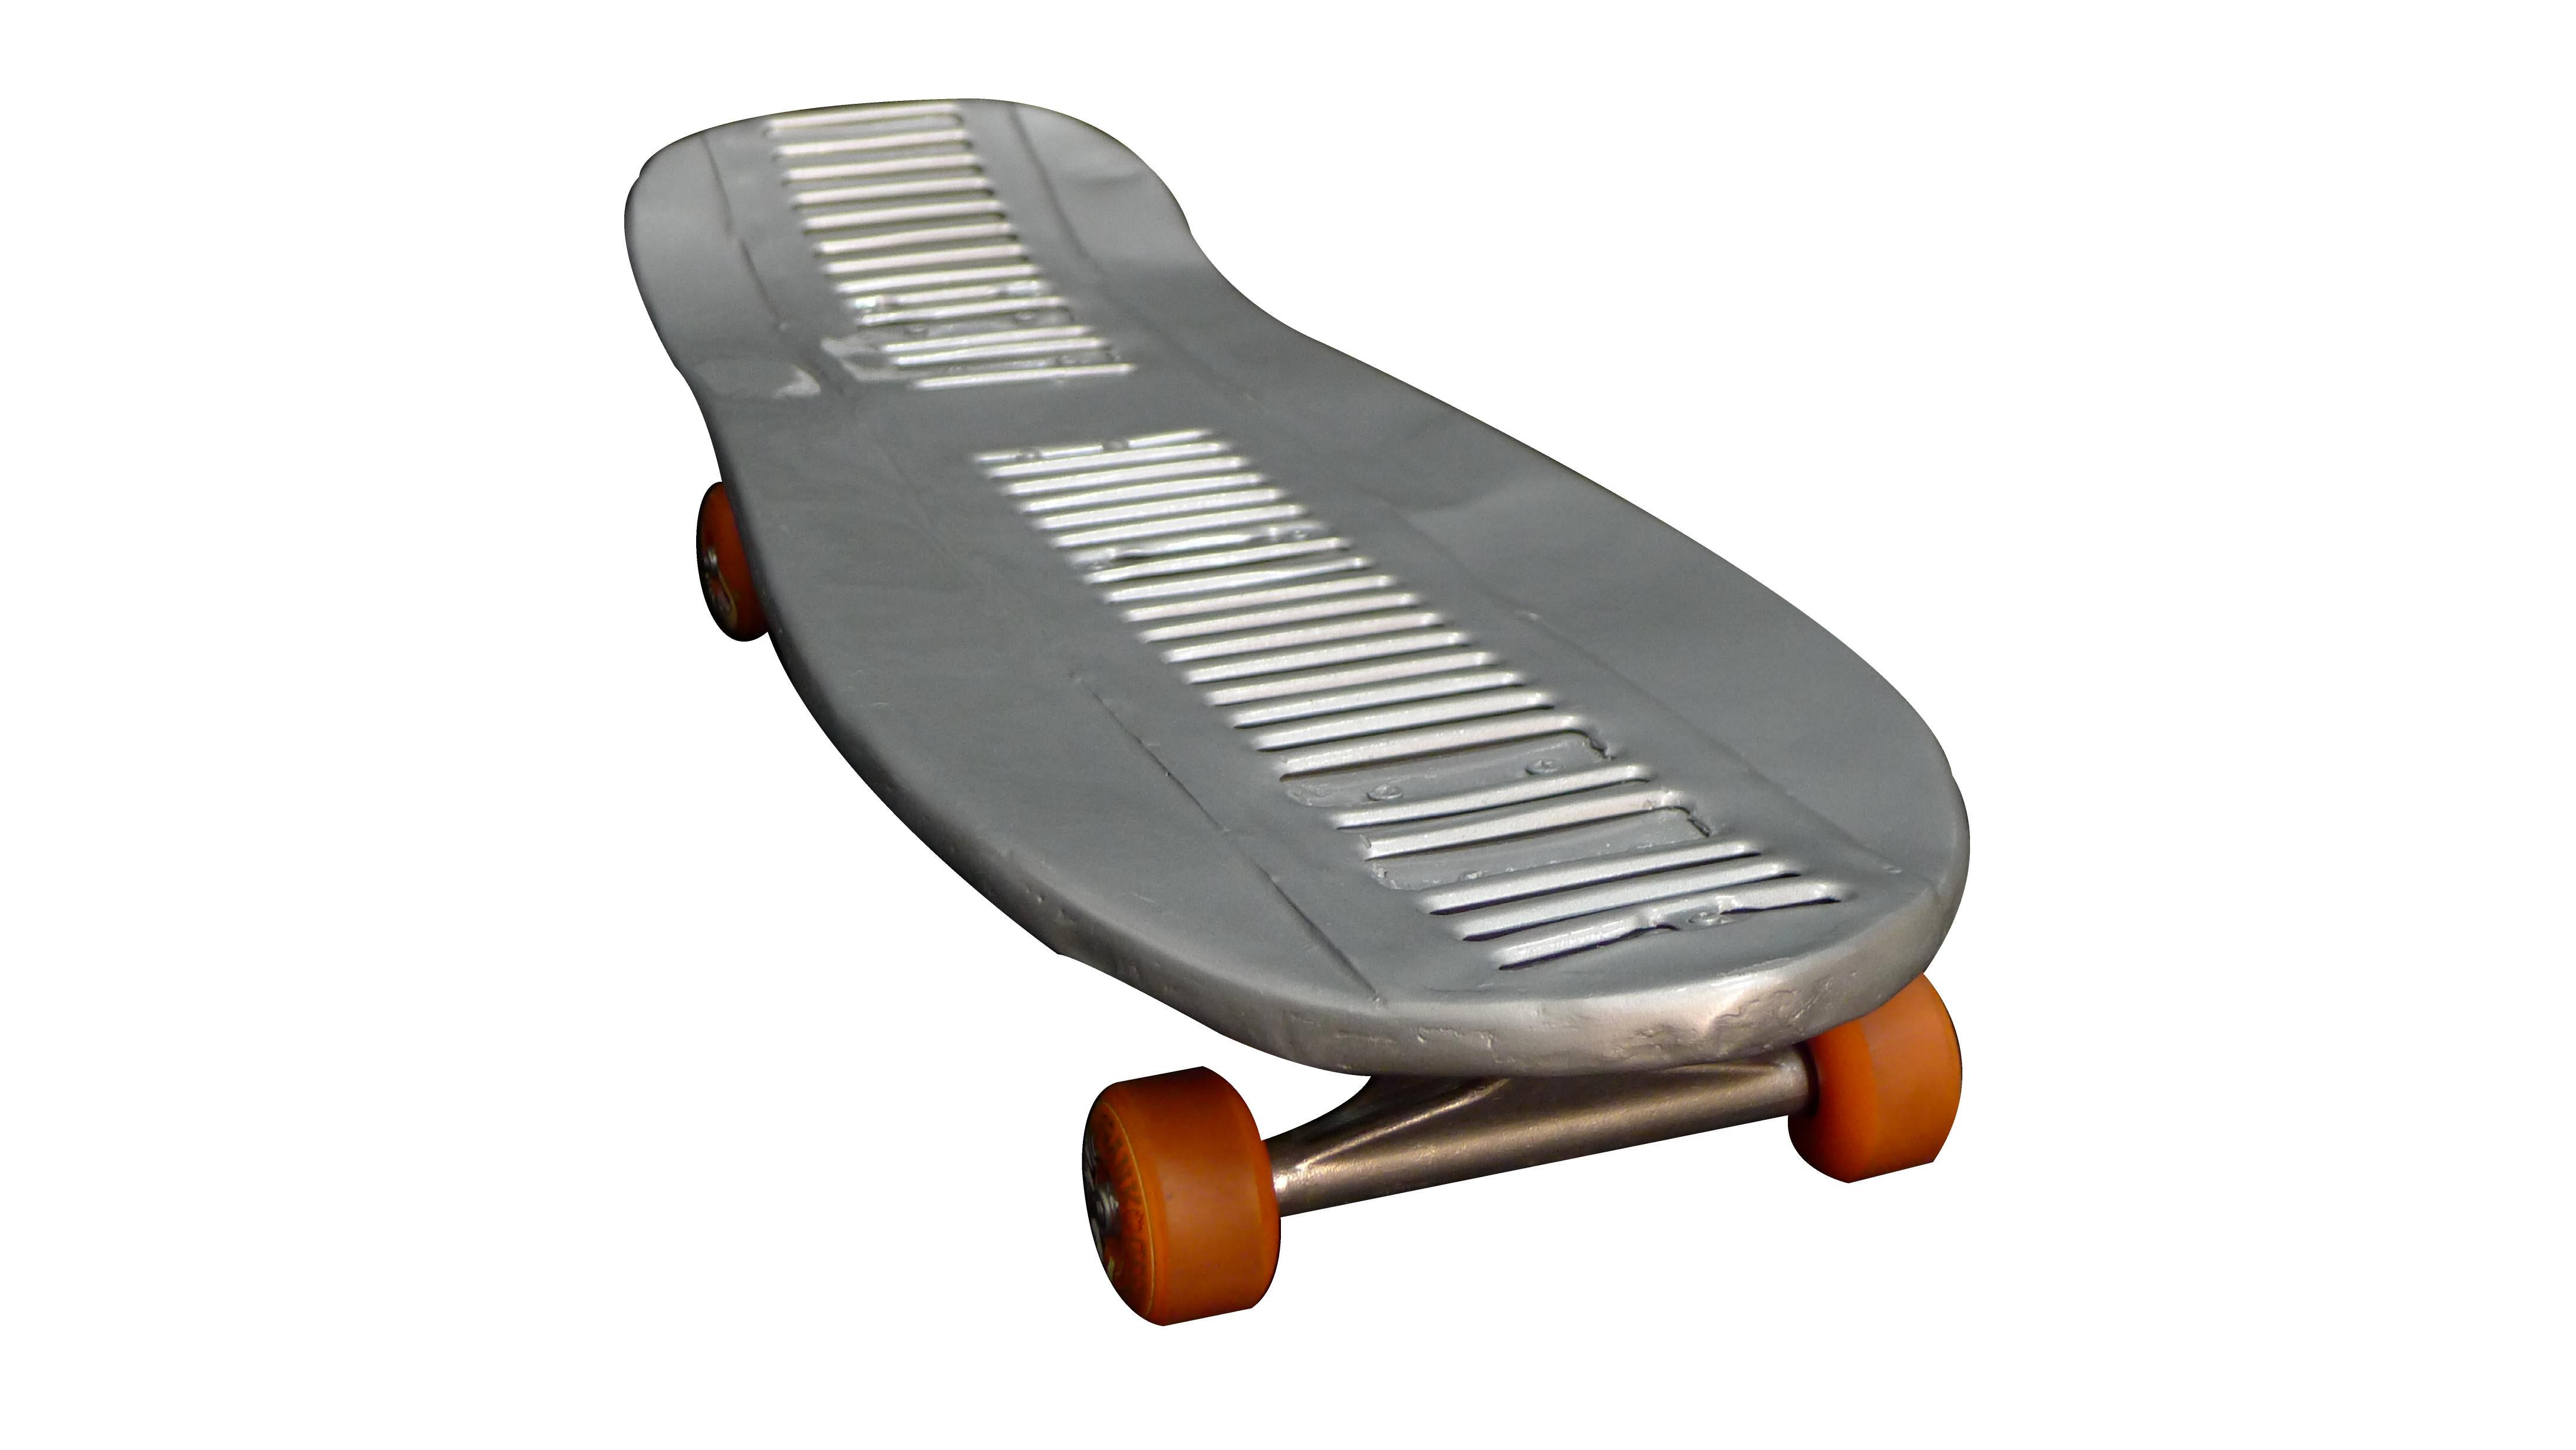 Post-Modern Contemporary collectible Skate from 